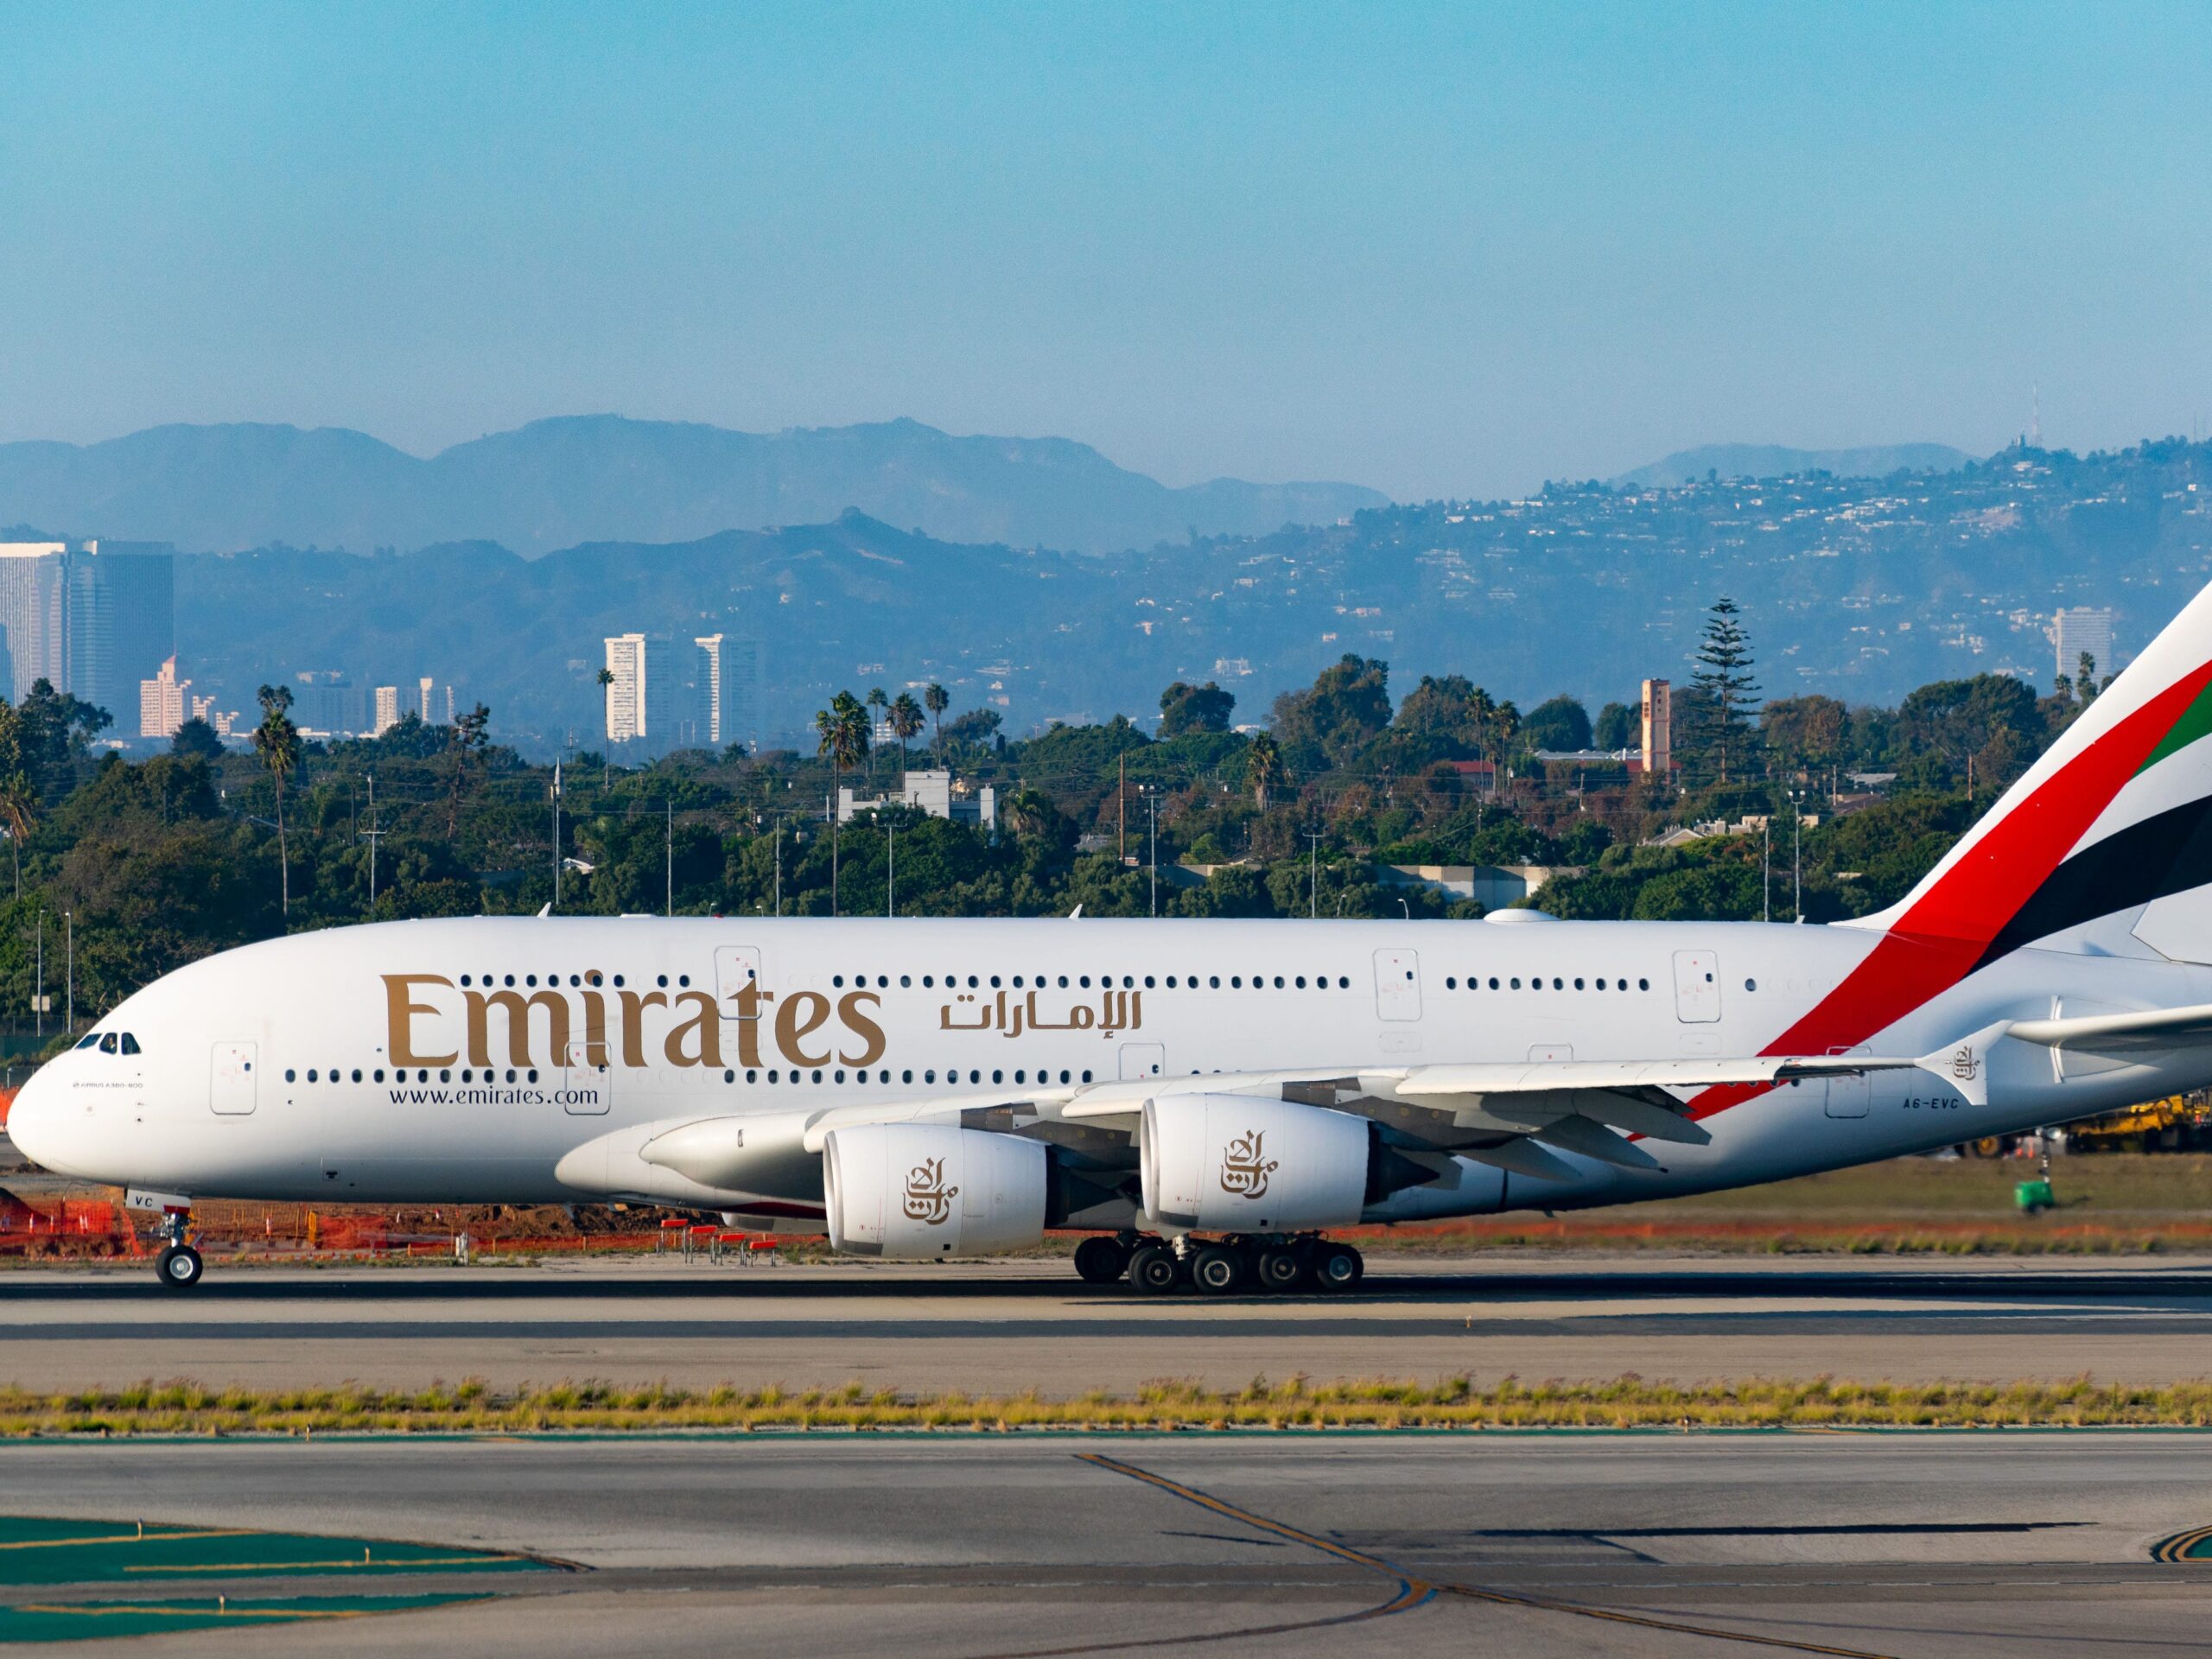 Emirates Airlines Airbus A380-842 prepares for takeoff at Los Angeles International Airport with the city and mountains in the background